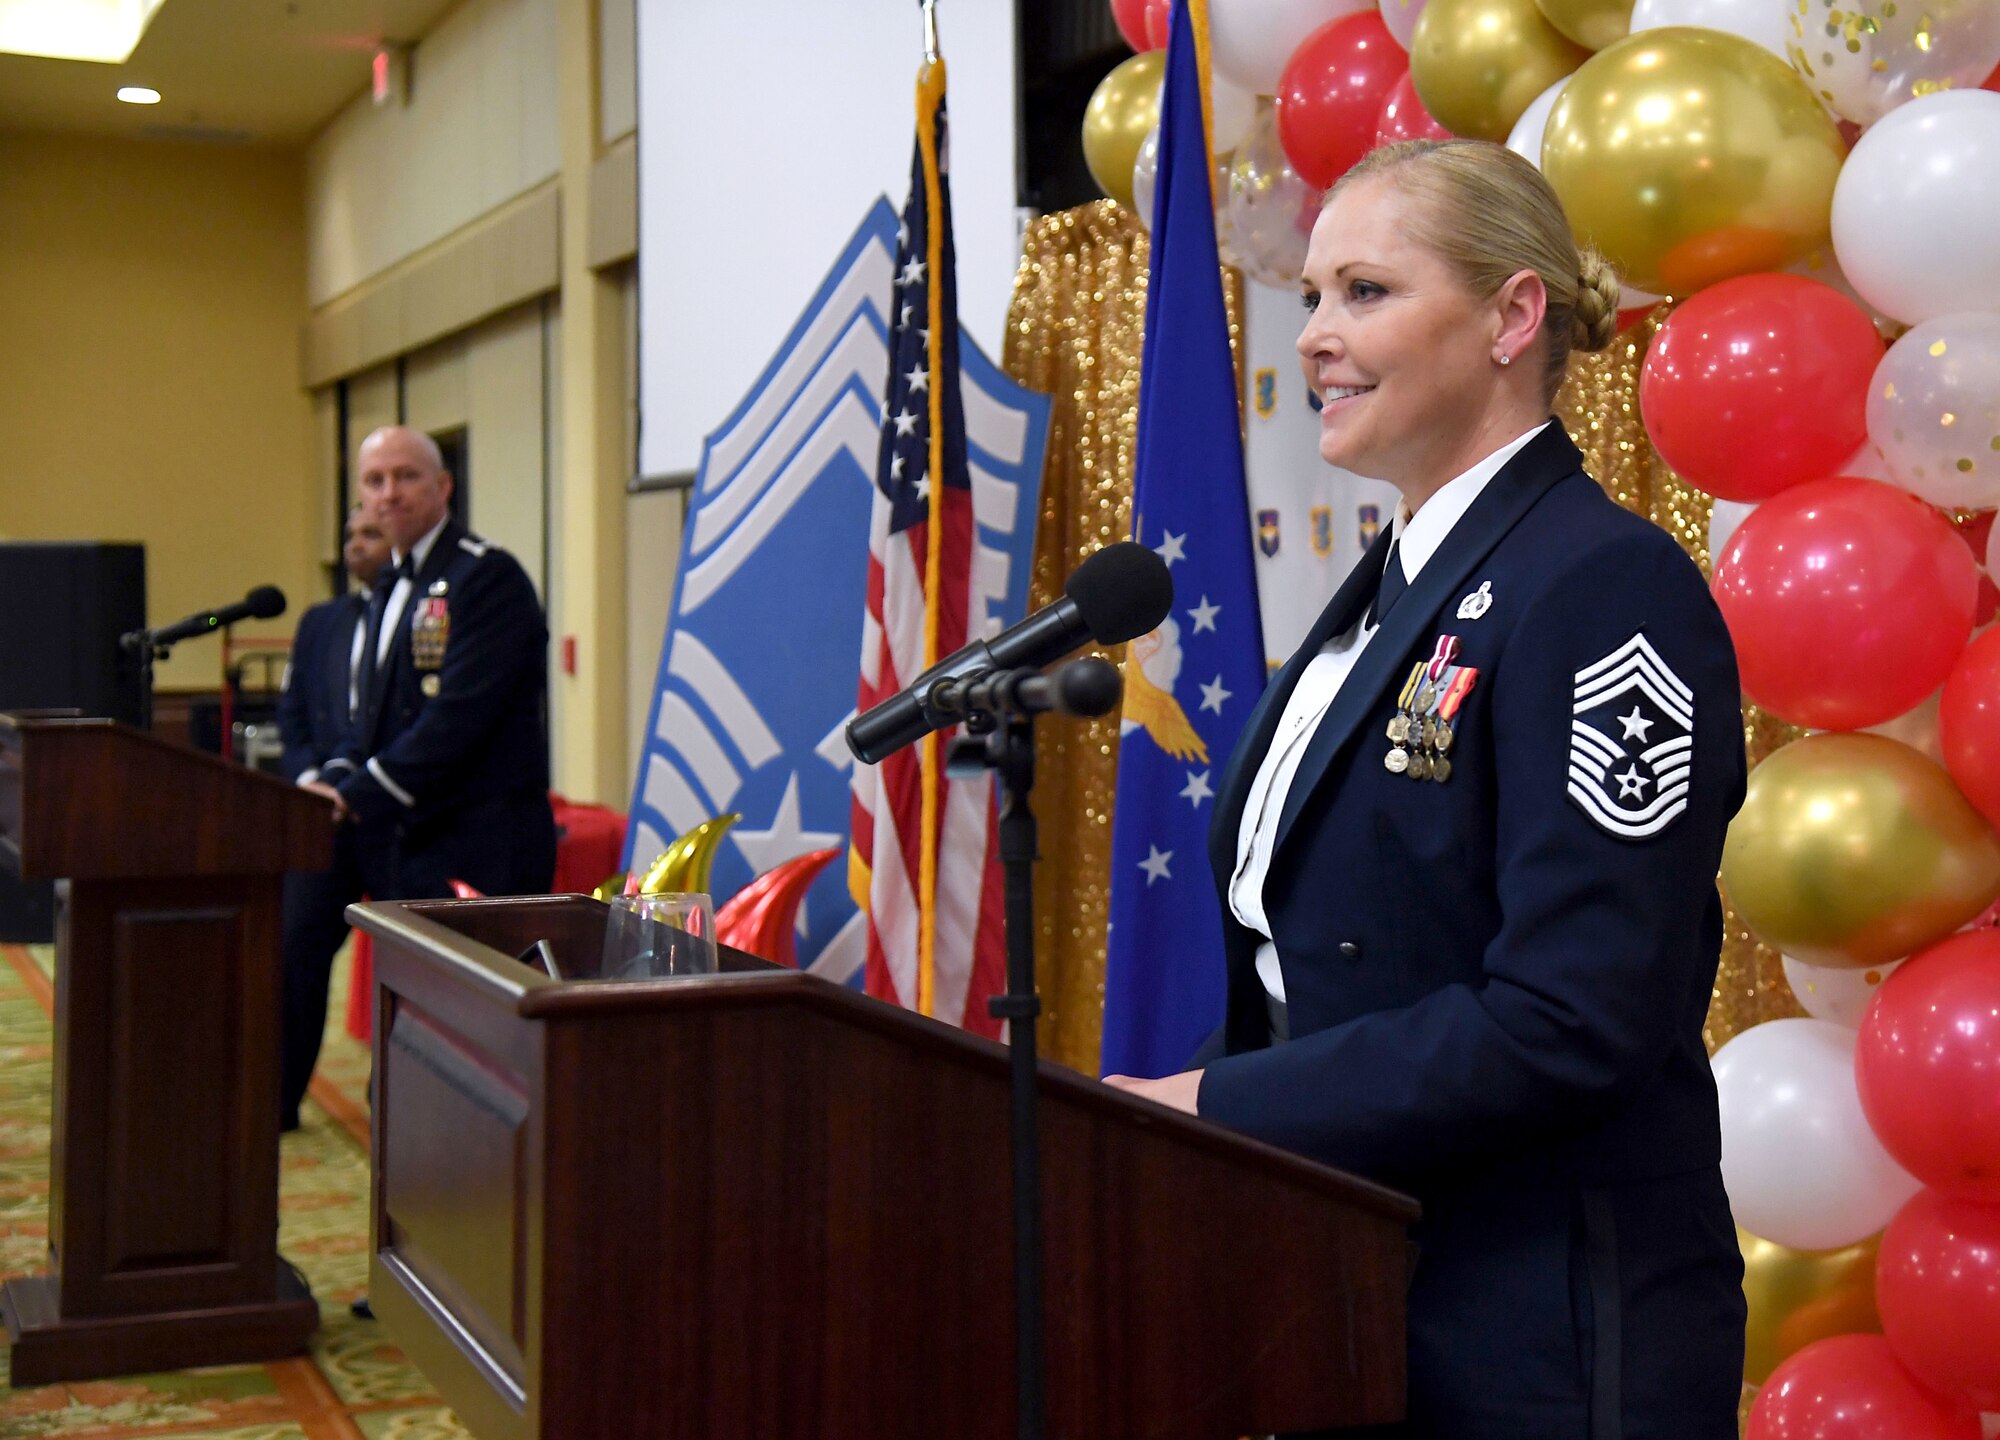 U.S. Air Force Chief Master Sgt. Sarah Esparza, 81st Training Wing command chief, delivers remarks during the Chief Master Sergeant Recognition Ceremony inside the Bay Breeze Event Center at Keesler Air Force Base, Mississippi, April 8, 2022. Four Keesler Airmen earned their chief master sergeant stripe during the 2022 promotion release. Chief master sergeants make up one percent of the Air Force enlisted force. (U.S. Air Force photo by Kemberly Groue)